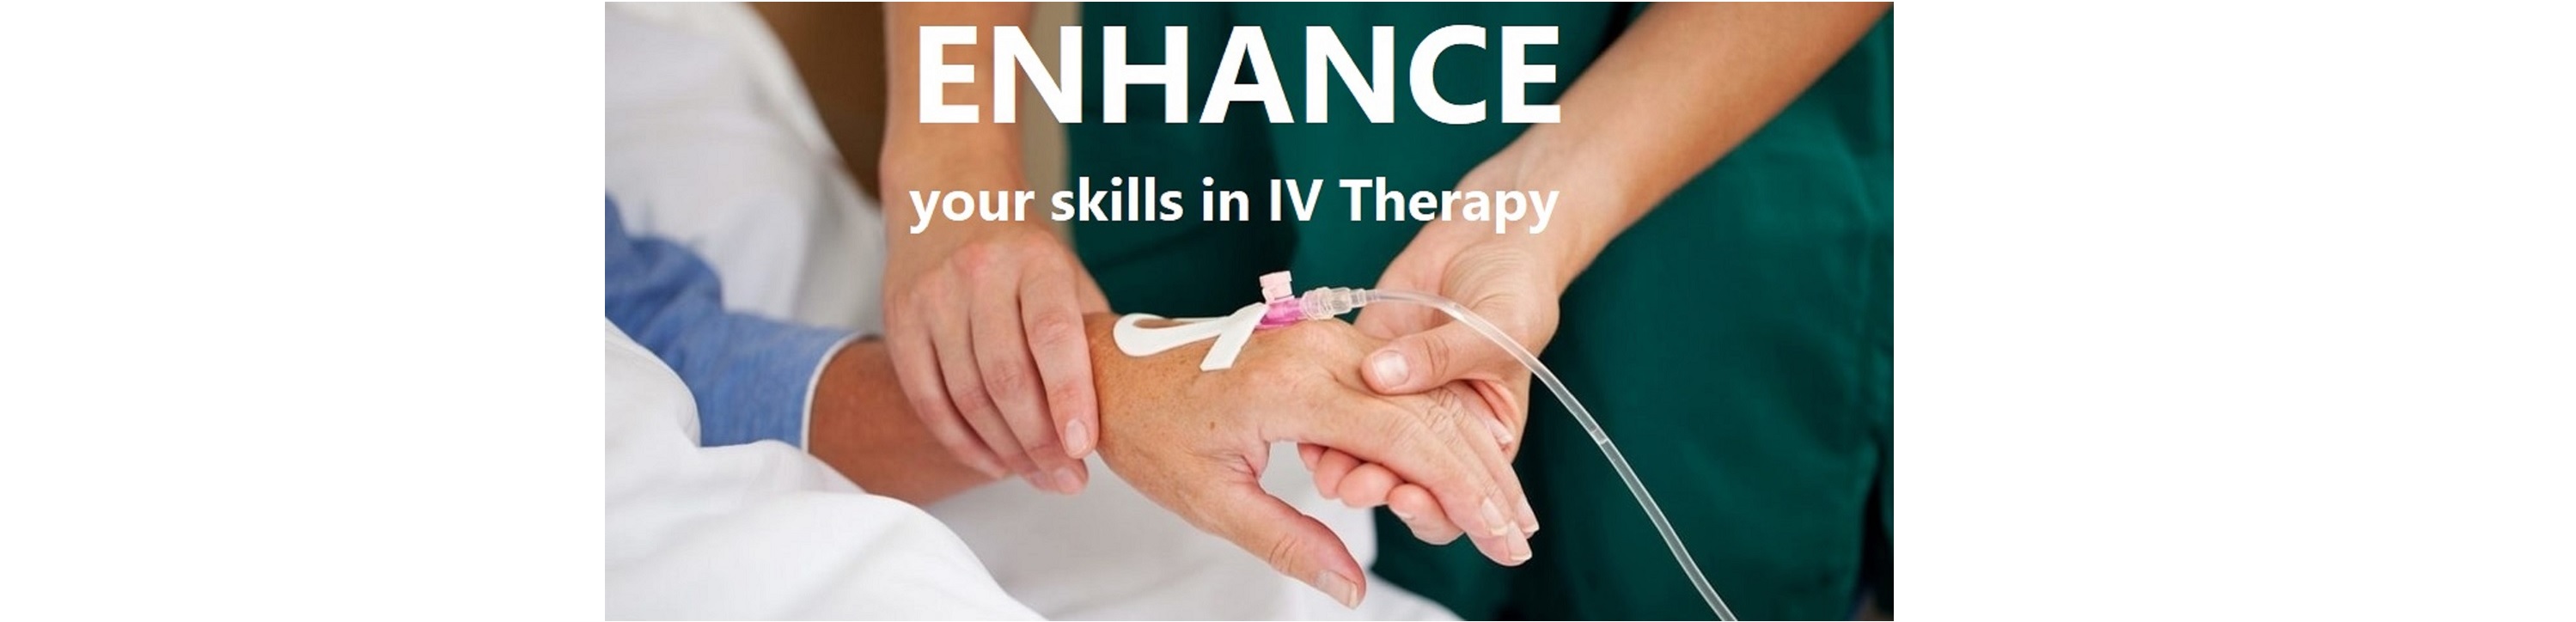 IV Therapy Course - Saturday, November 16, 2019 Banner